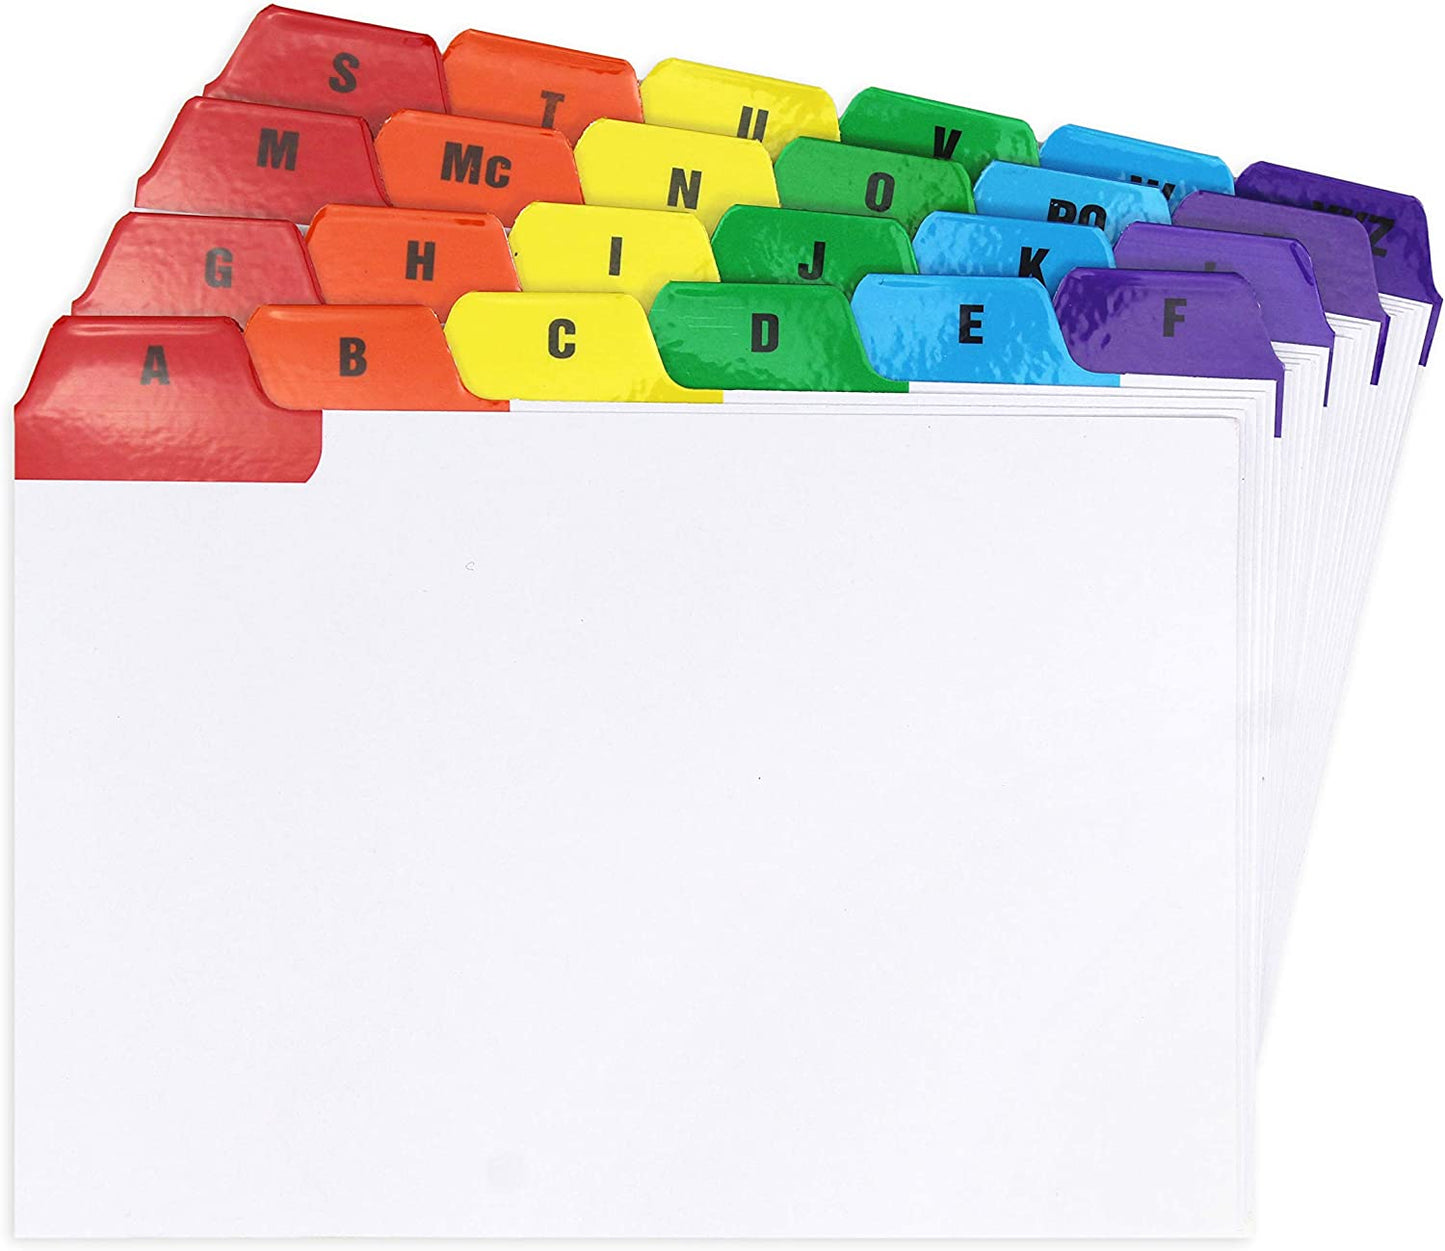 White Cards And Coloured Tab A-Z Guide Cards 152 x 102mm (6"x4")